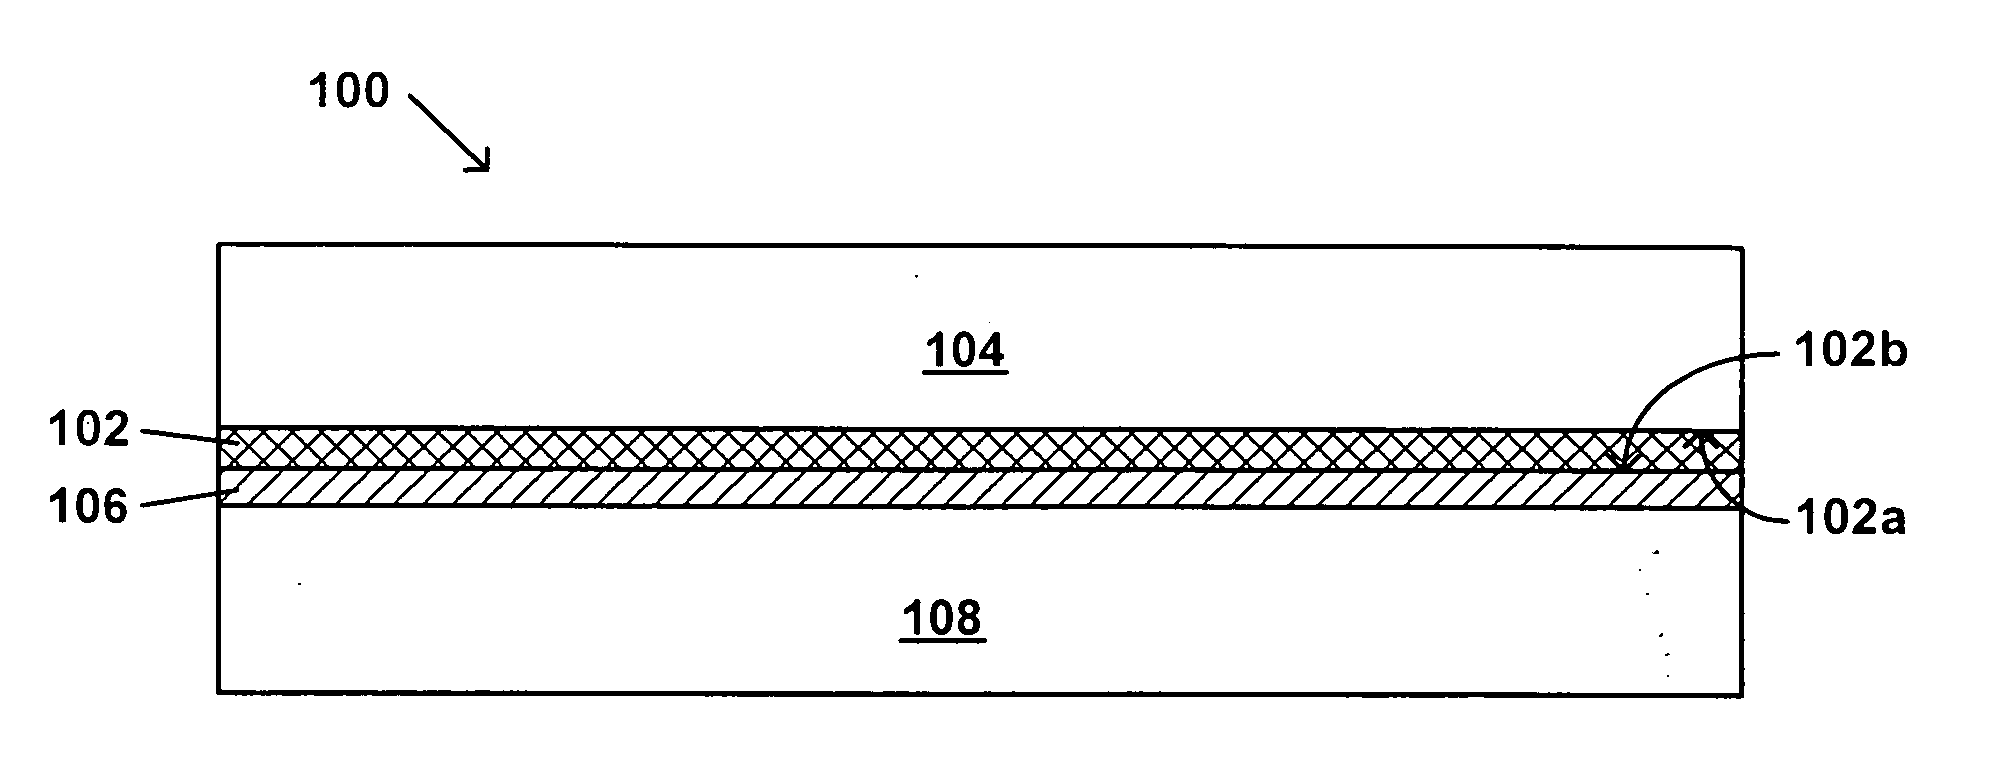 Thin film photovoltaic assembly method